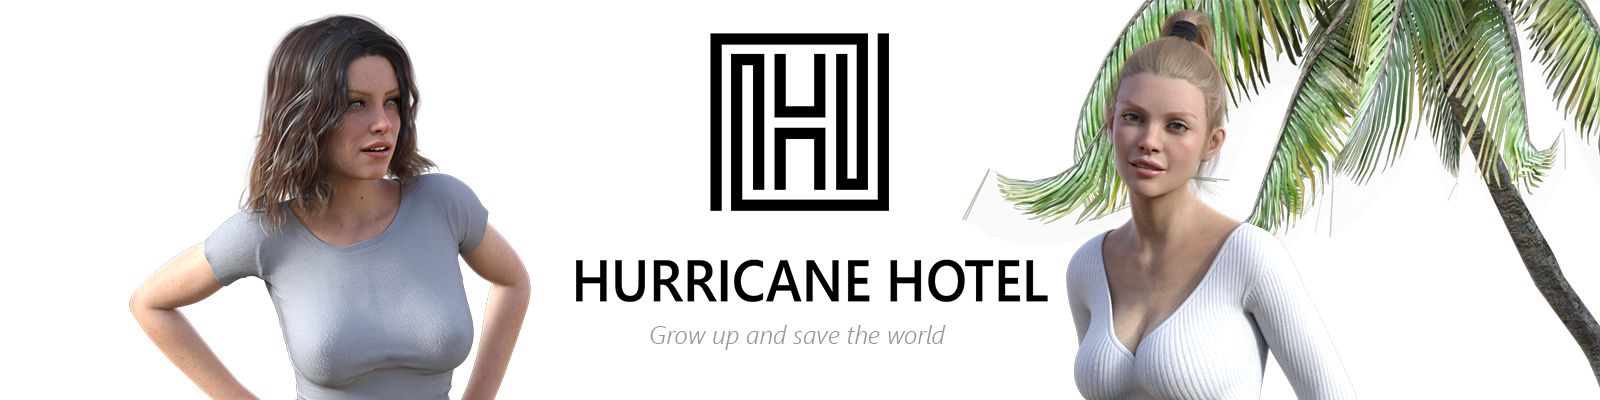 Hurricane Hotel Apk Android Adult Game Download (11)